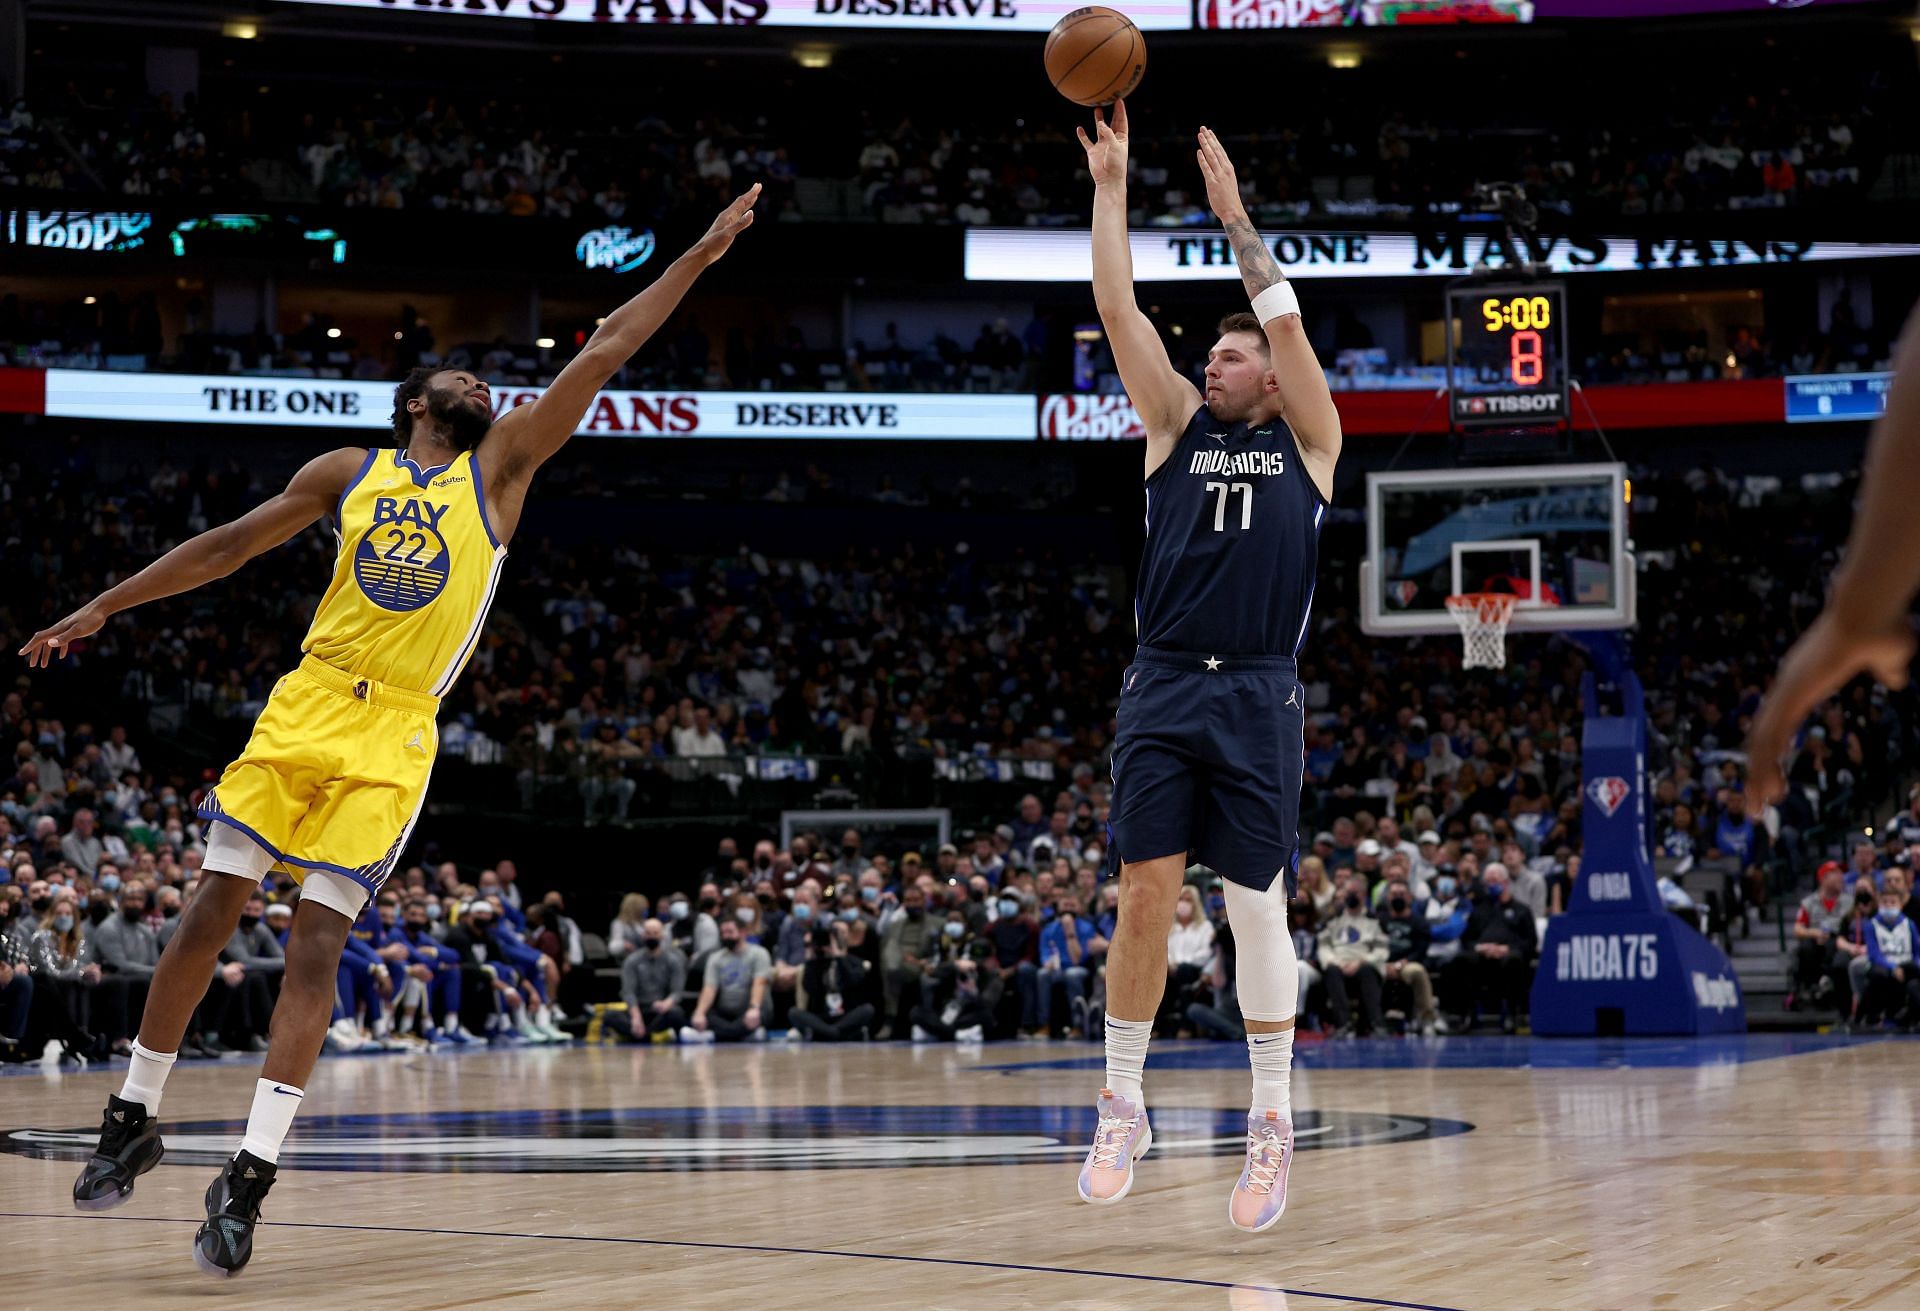 Luka Doncic of the Dallas Mavericks shoots against Andrew Wiggins of the Golden State Warriors.